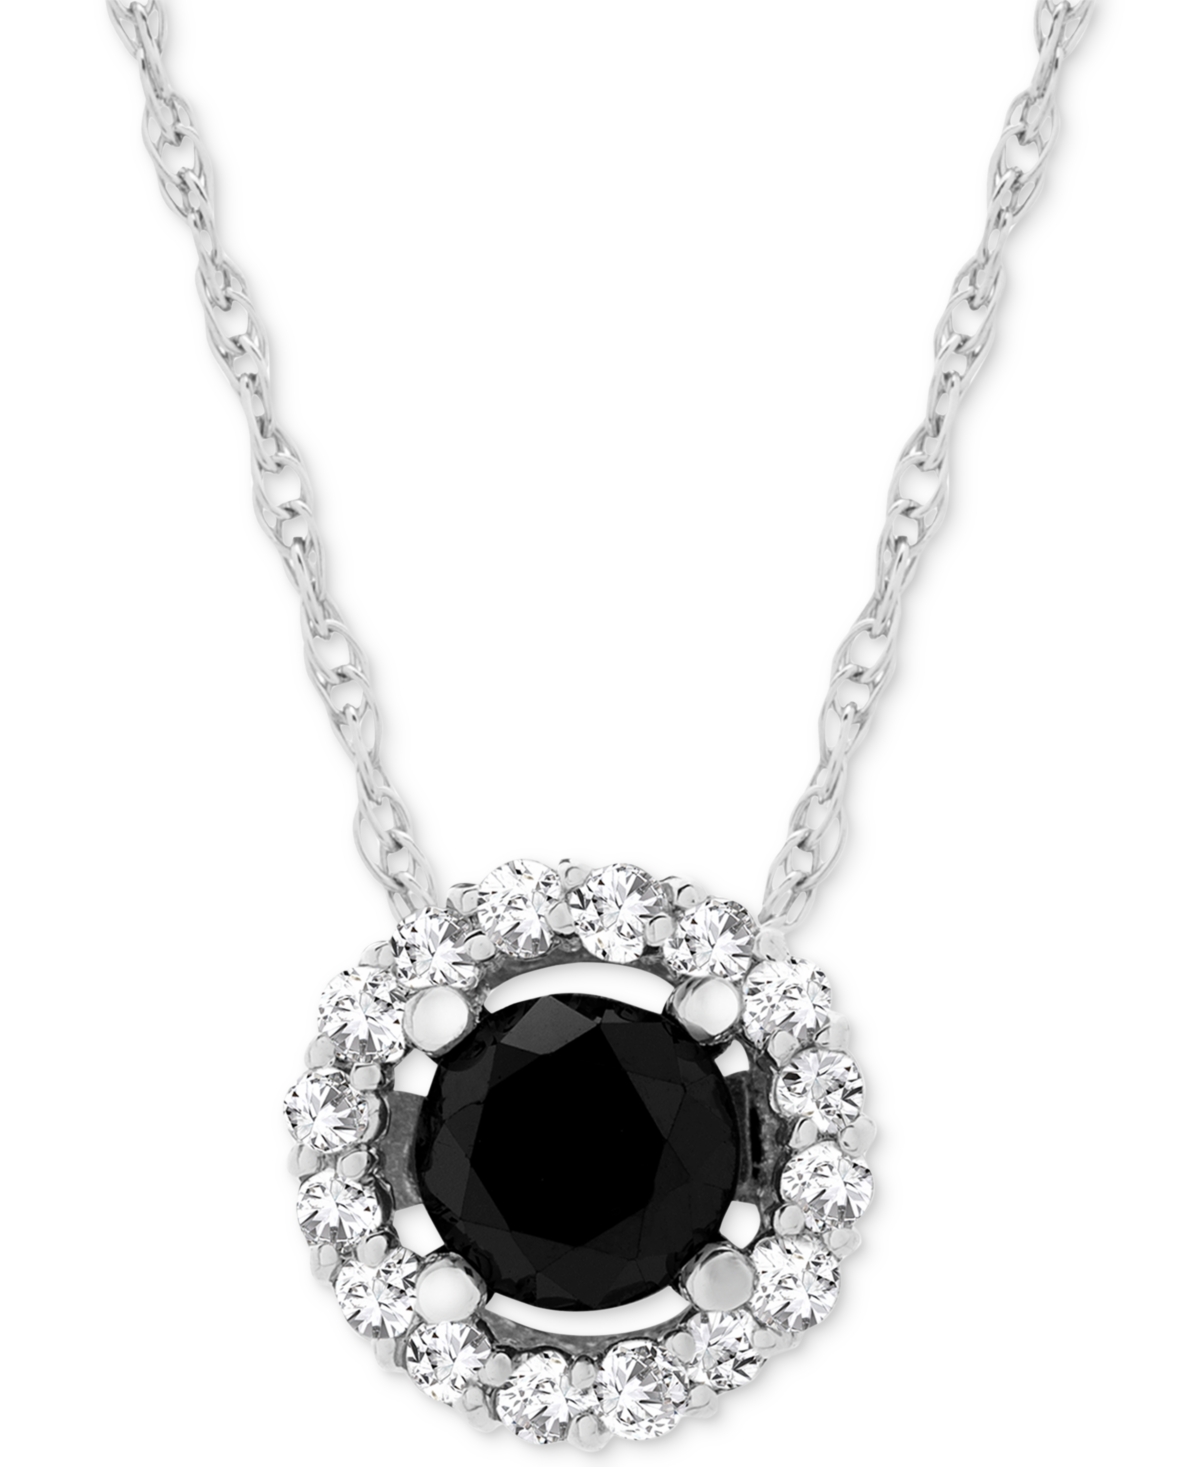 Diamond Halo 18" Pendant Necklace (1 ct. t.w.) in 14k White Gold, Created for Macy's - White Gold